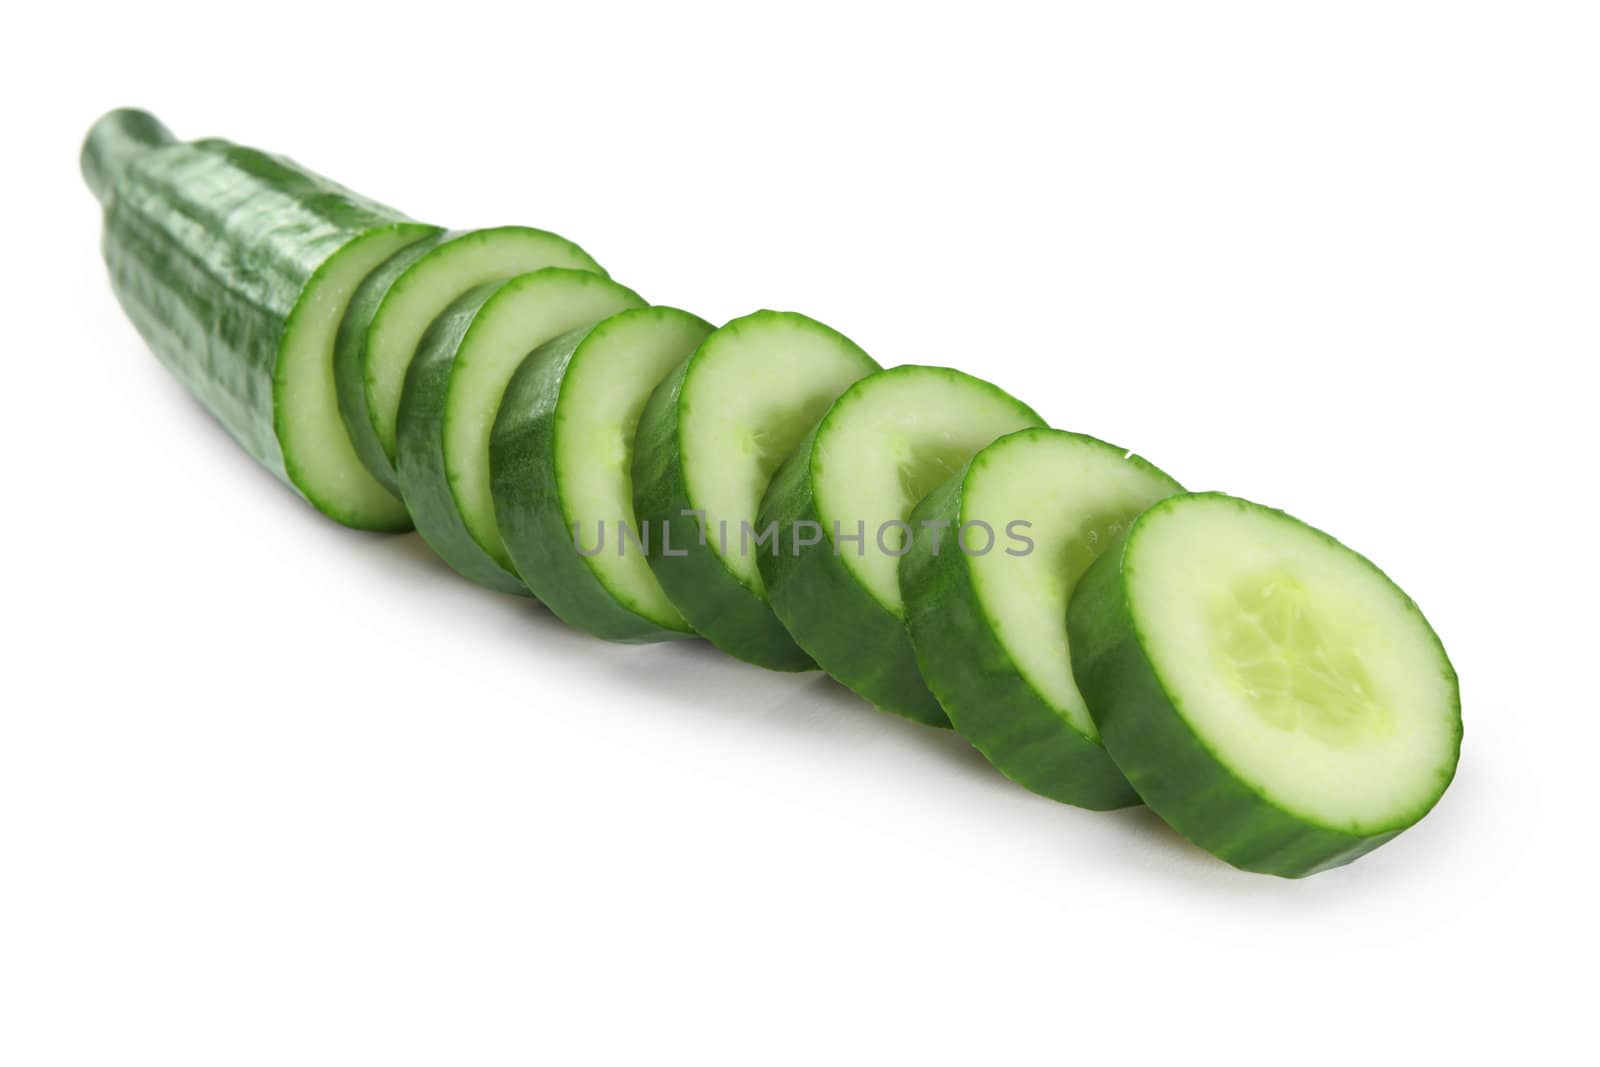 Photo of a cucumber cut into thick slices over a white background.